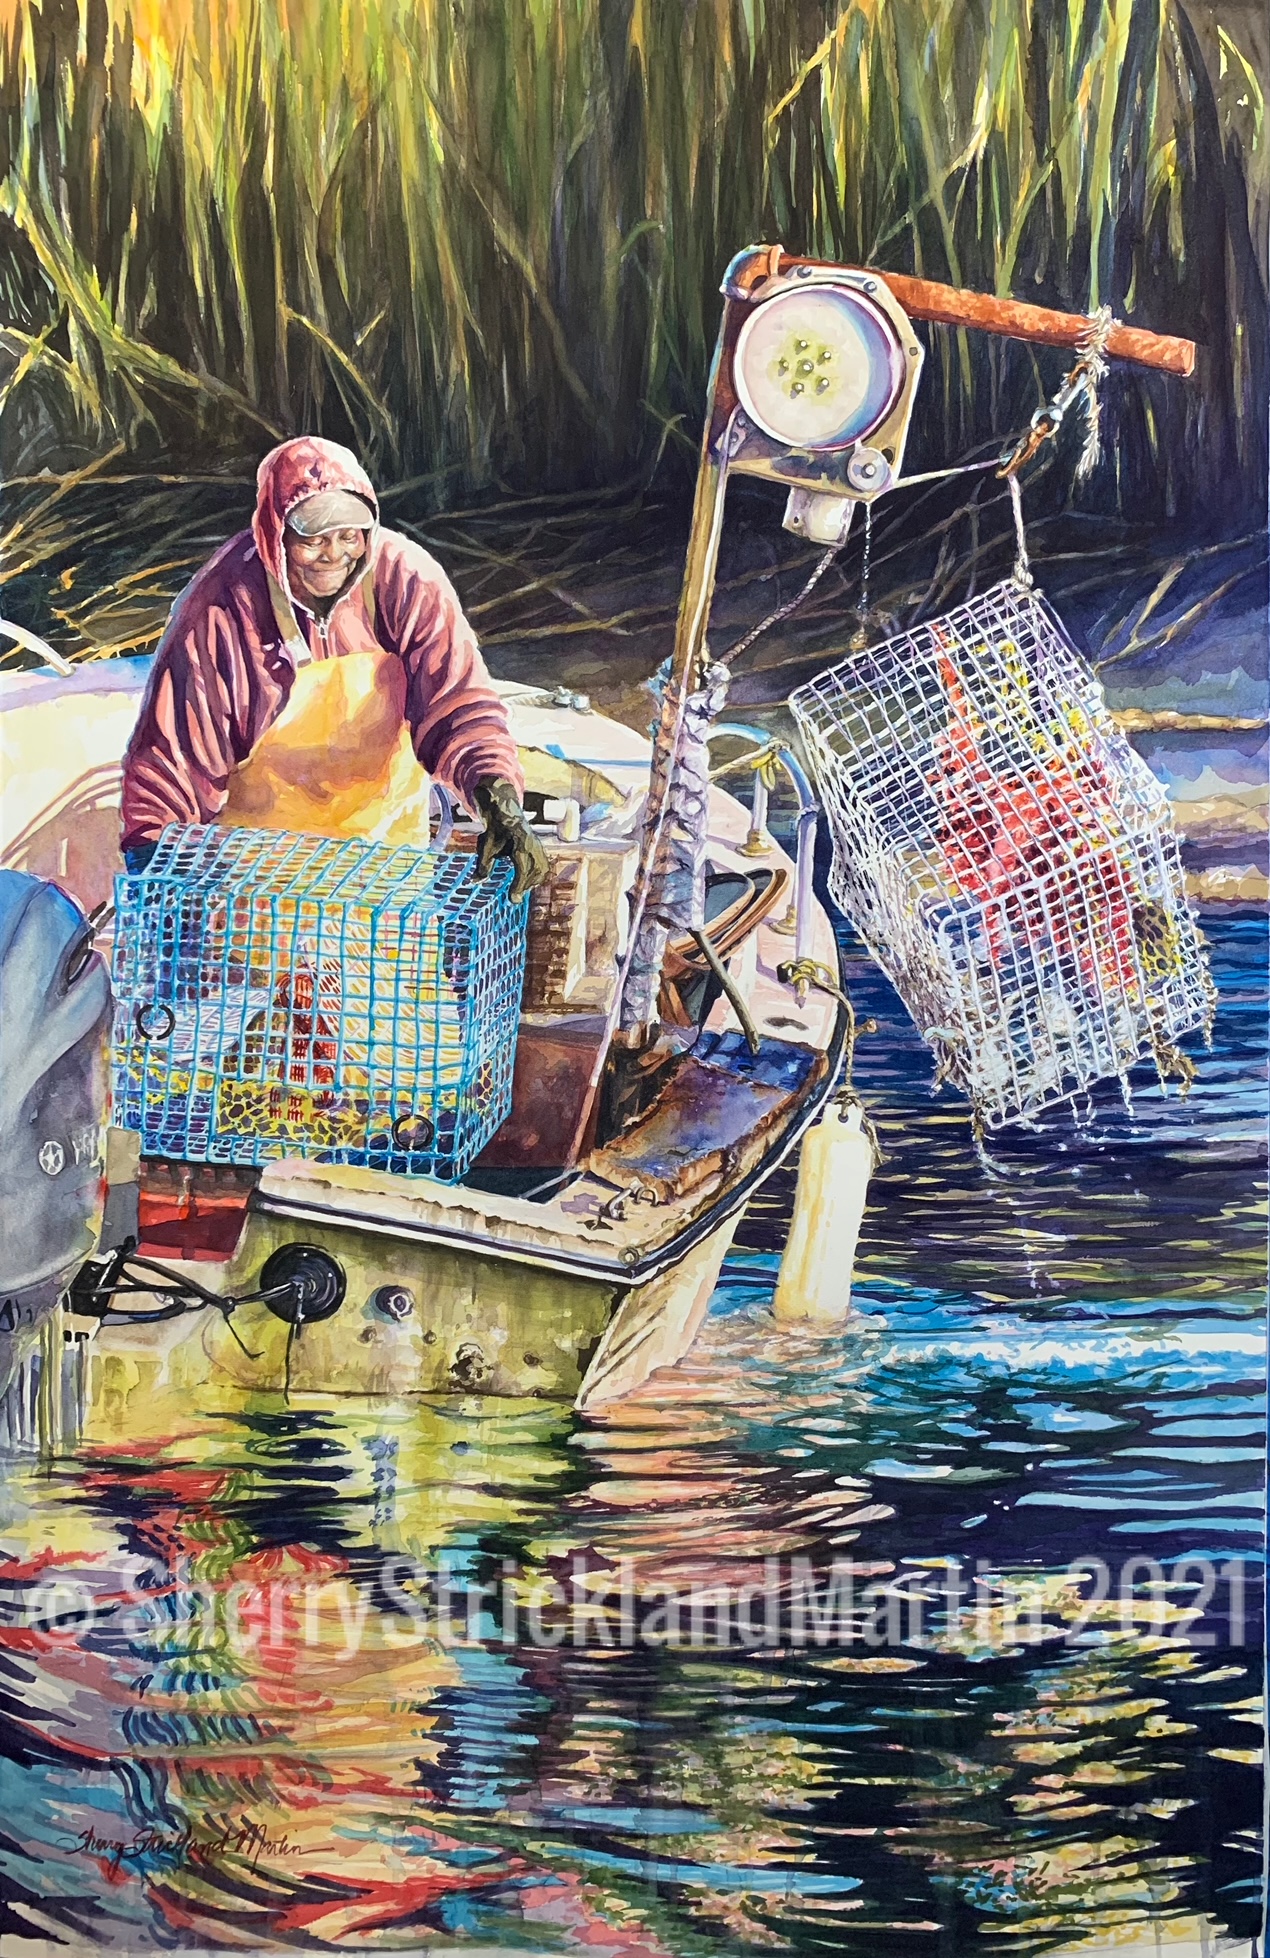 "Morning Catch on Caper's Creek" Watercolor Image size 25" x 40" Framed available @THIBAULT GALLERY